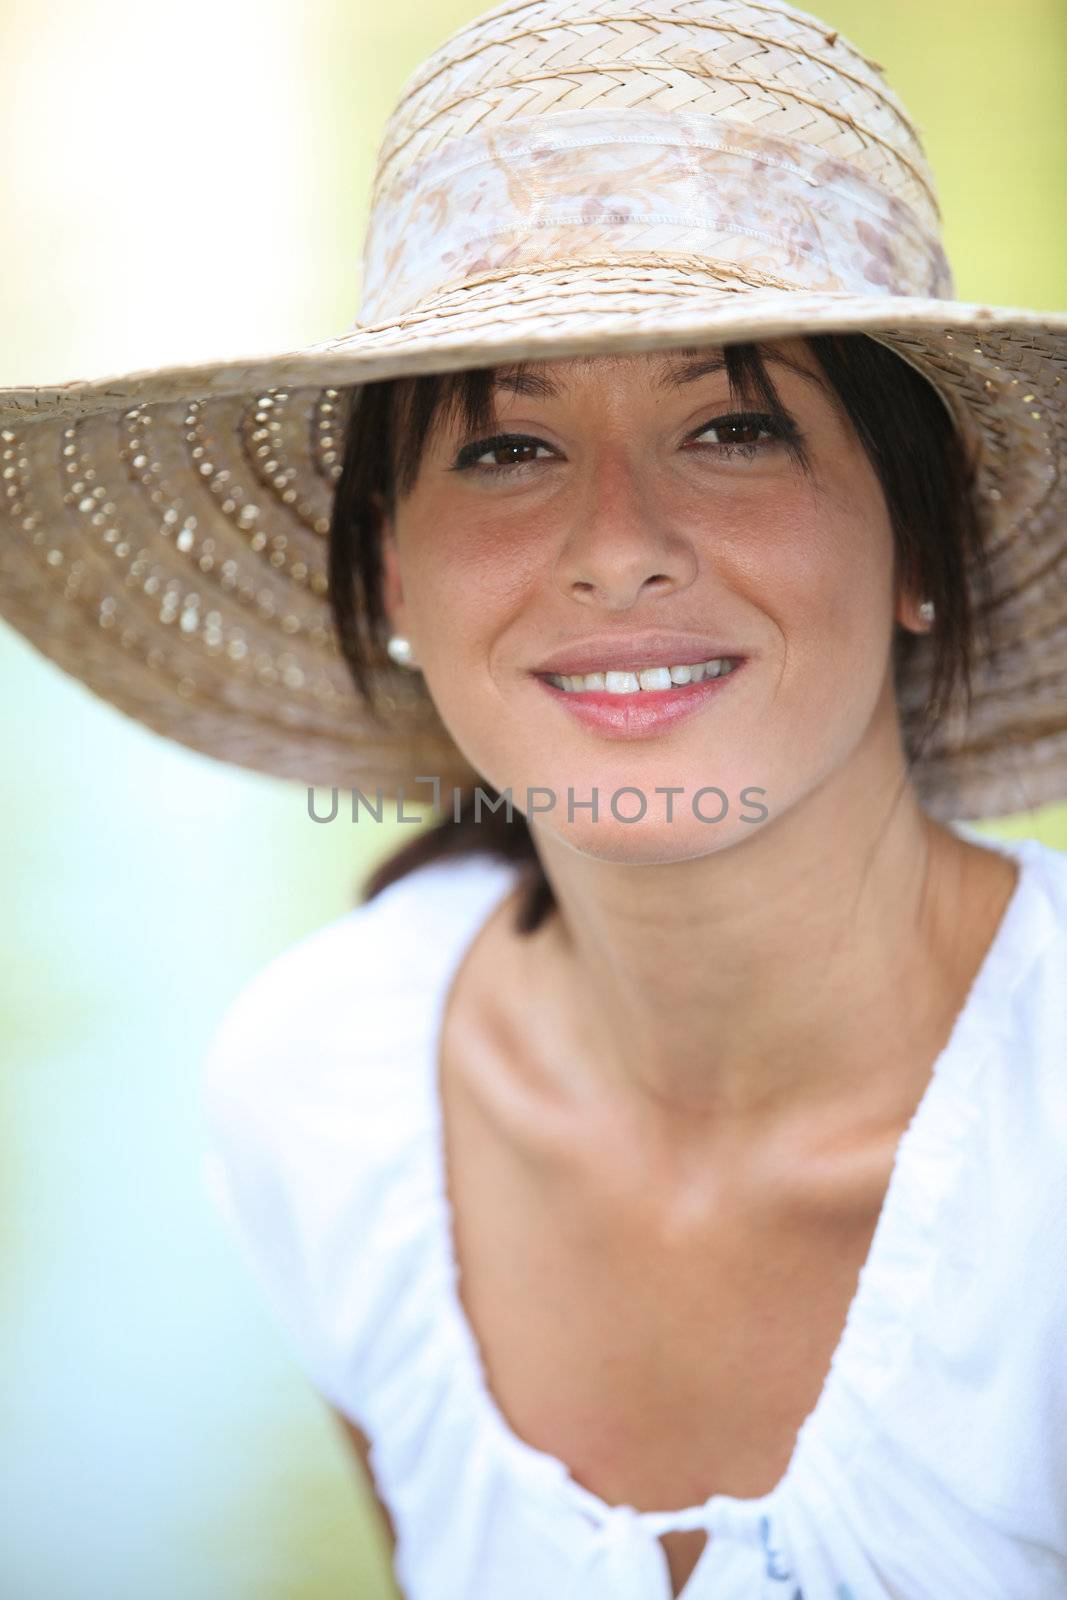 30 years old brunette wearing a straw hat and a summer dress by phovoir